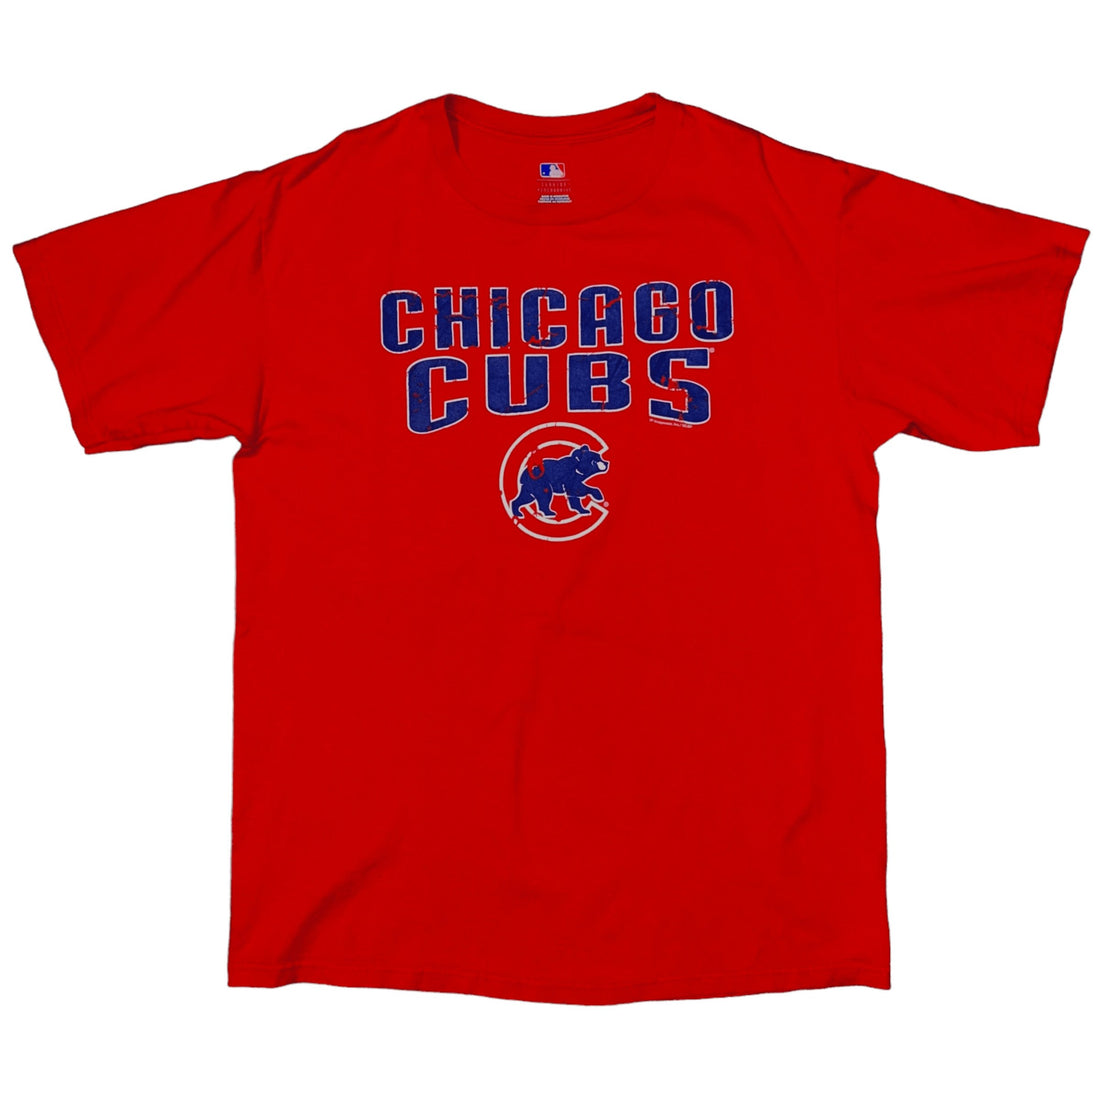 T-shirt Chicago Cubs MLB (L/XL) - oldstyleclothing